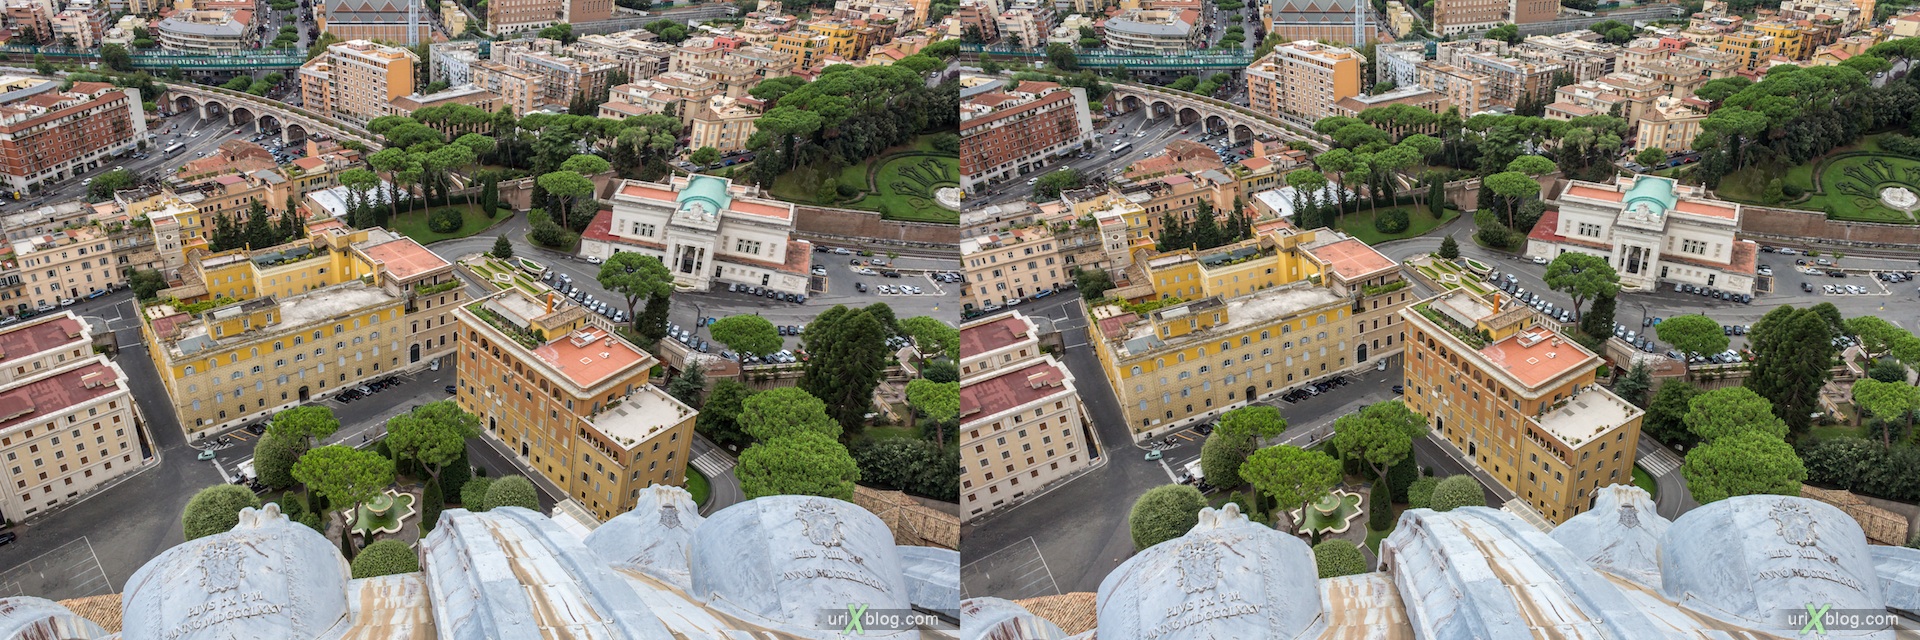 2012, Saint Peter's Basilica, Vatican, Rome, Italy, 3D, stereo pair, cross-eyed, crossview, cross view stereo pair